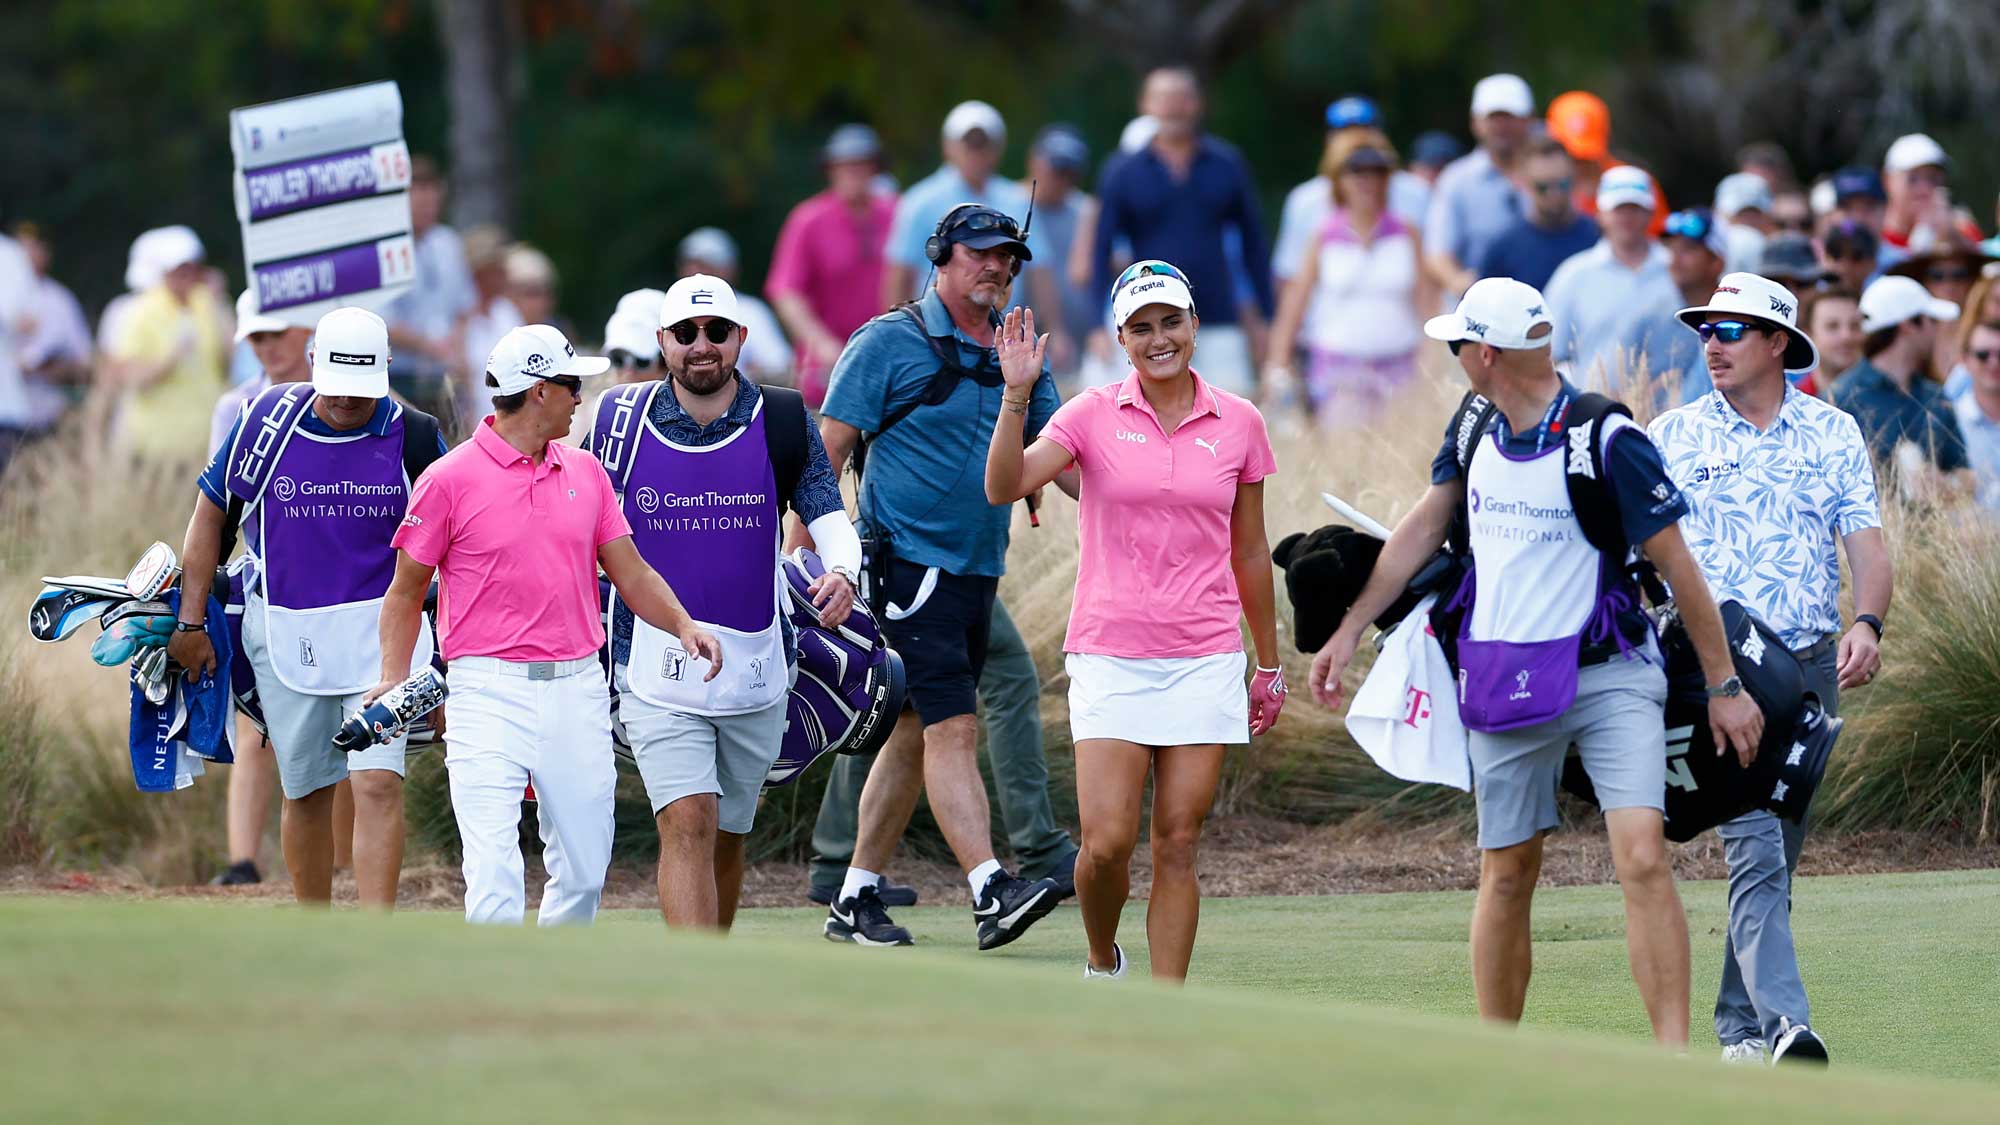 Lexi Thompson Ace Propels Team Up Leaderboard at Grant Thornton